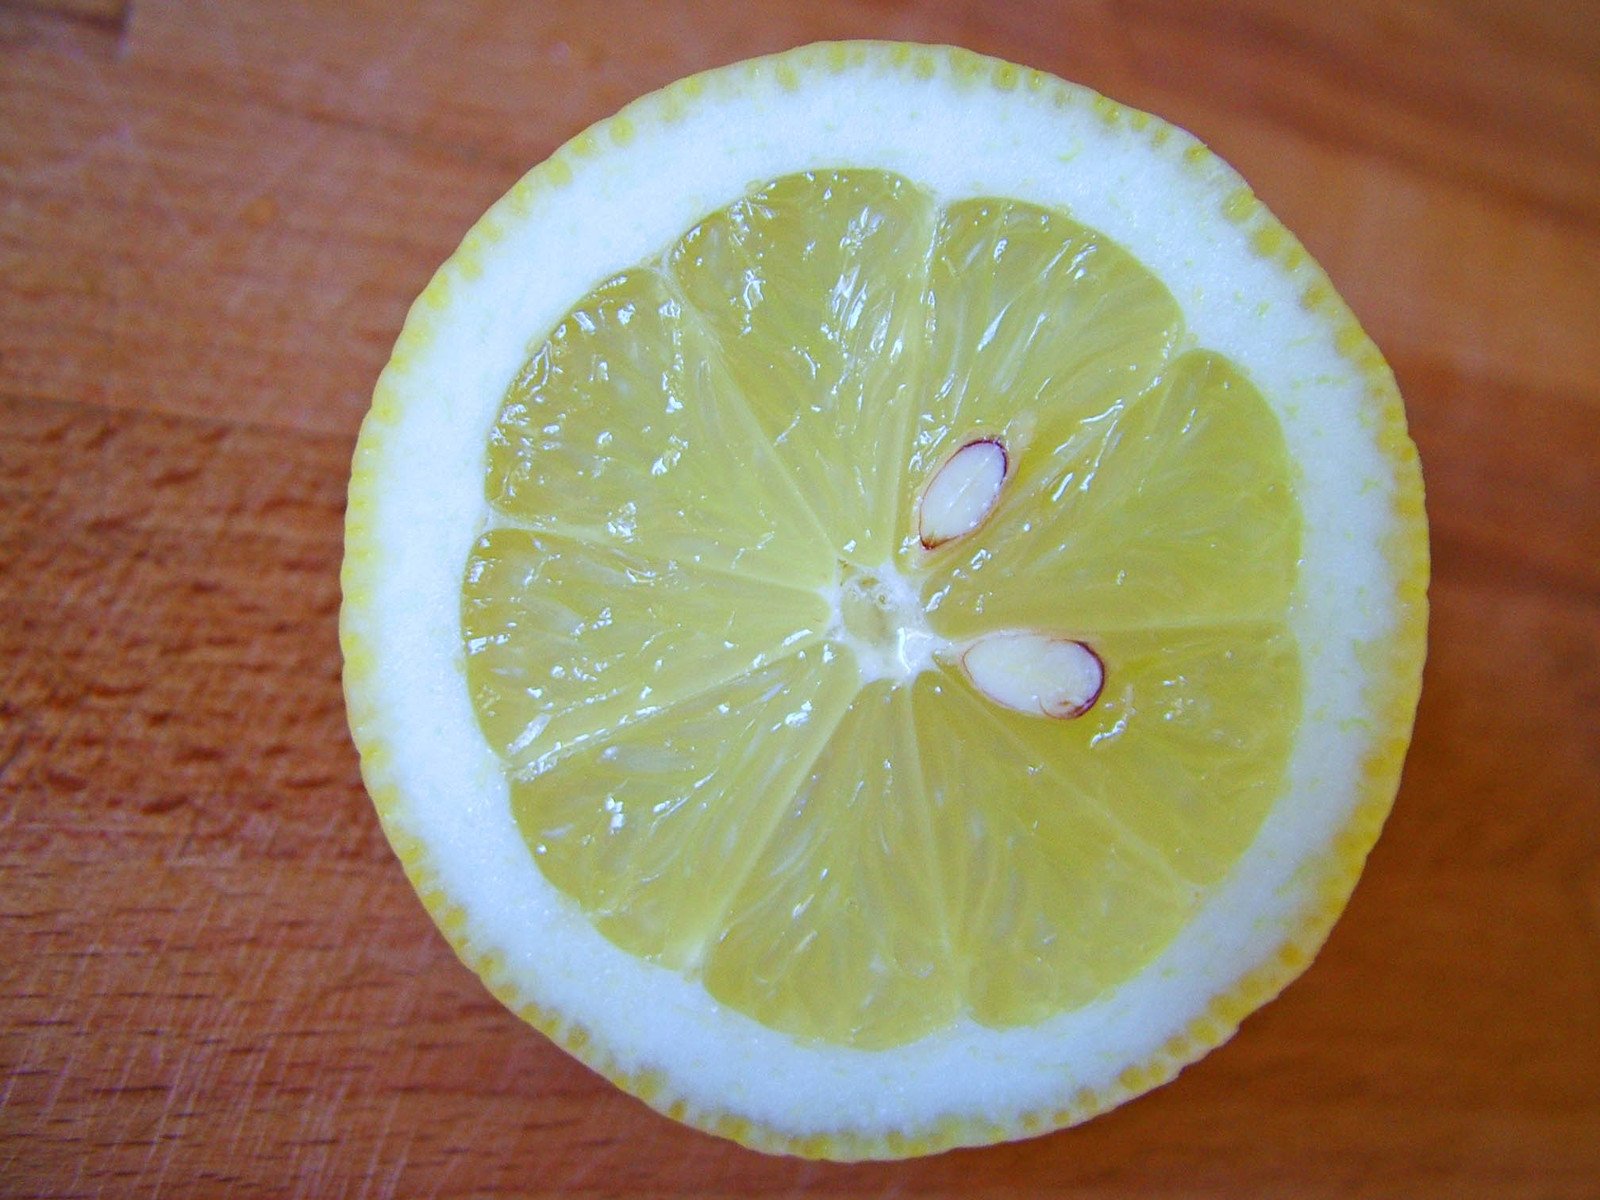 the slice of a lemon is lying on the surface